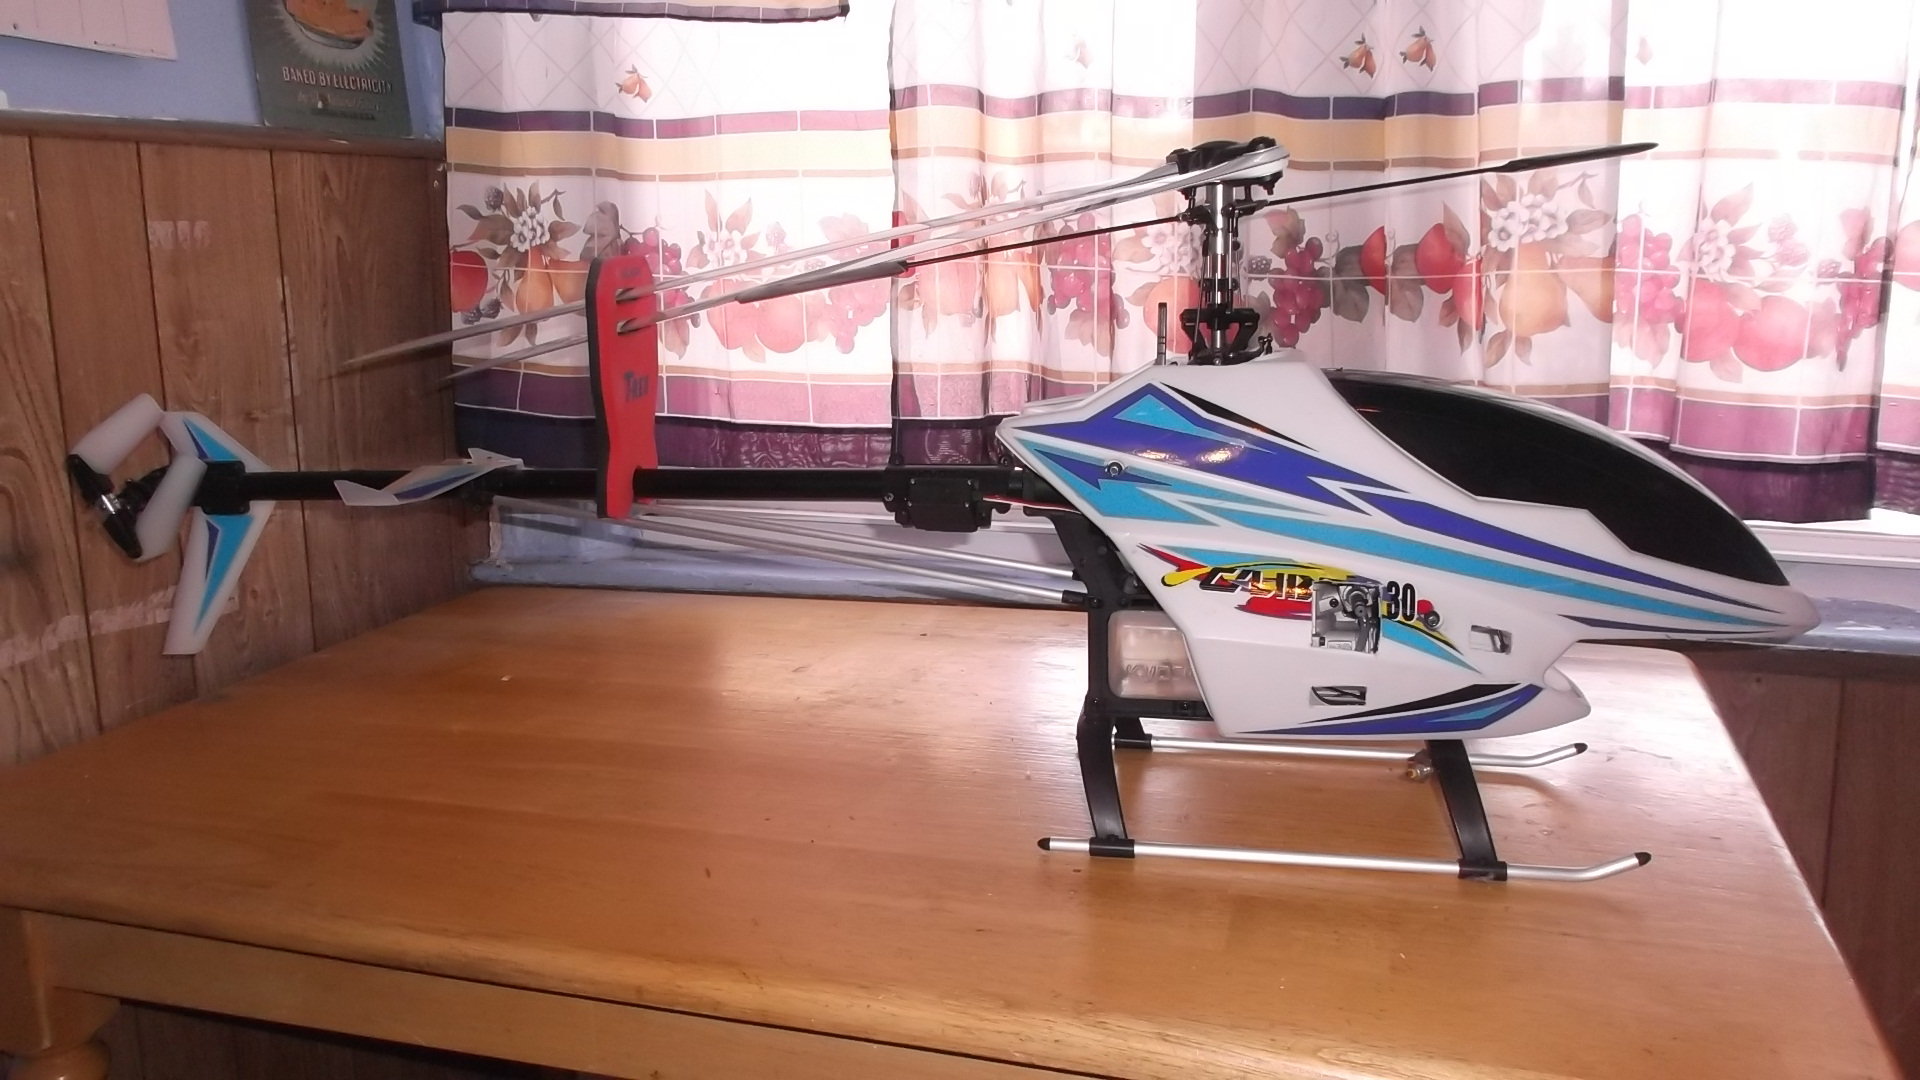 kyosho rc helicopter